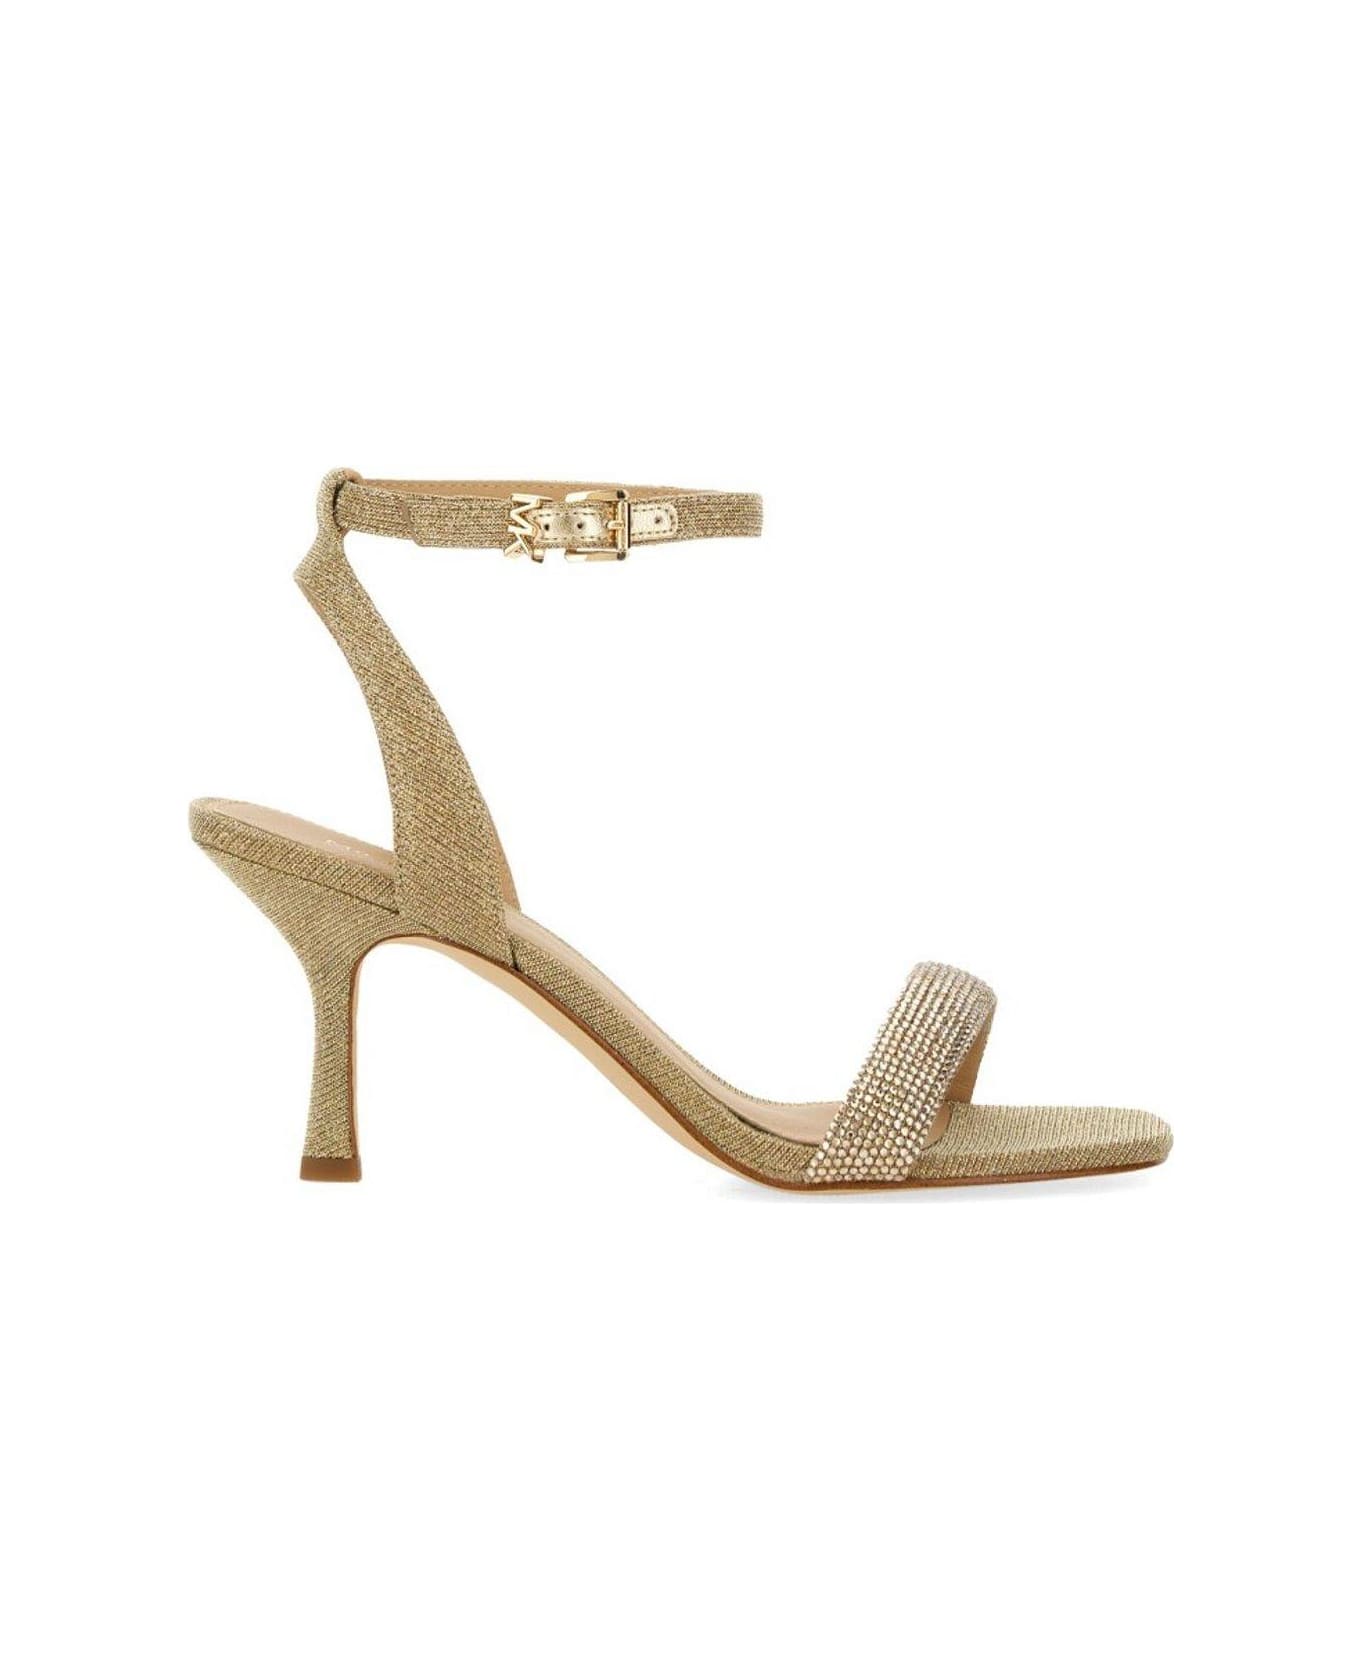 MICHAEL Michael Kors Carrie Rhinestoned Embellished Sandals - Pale Gold